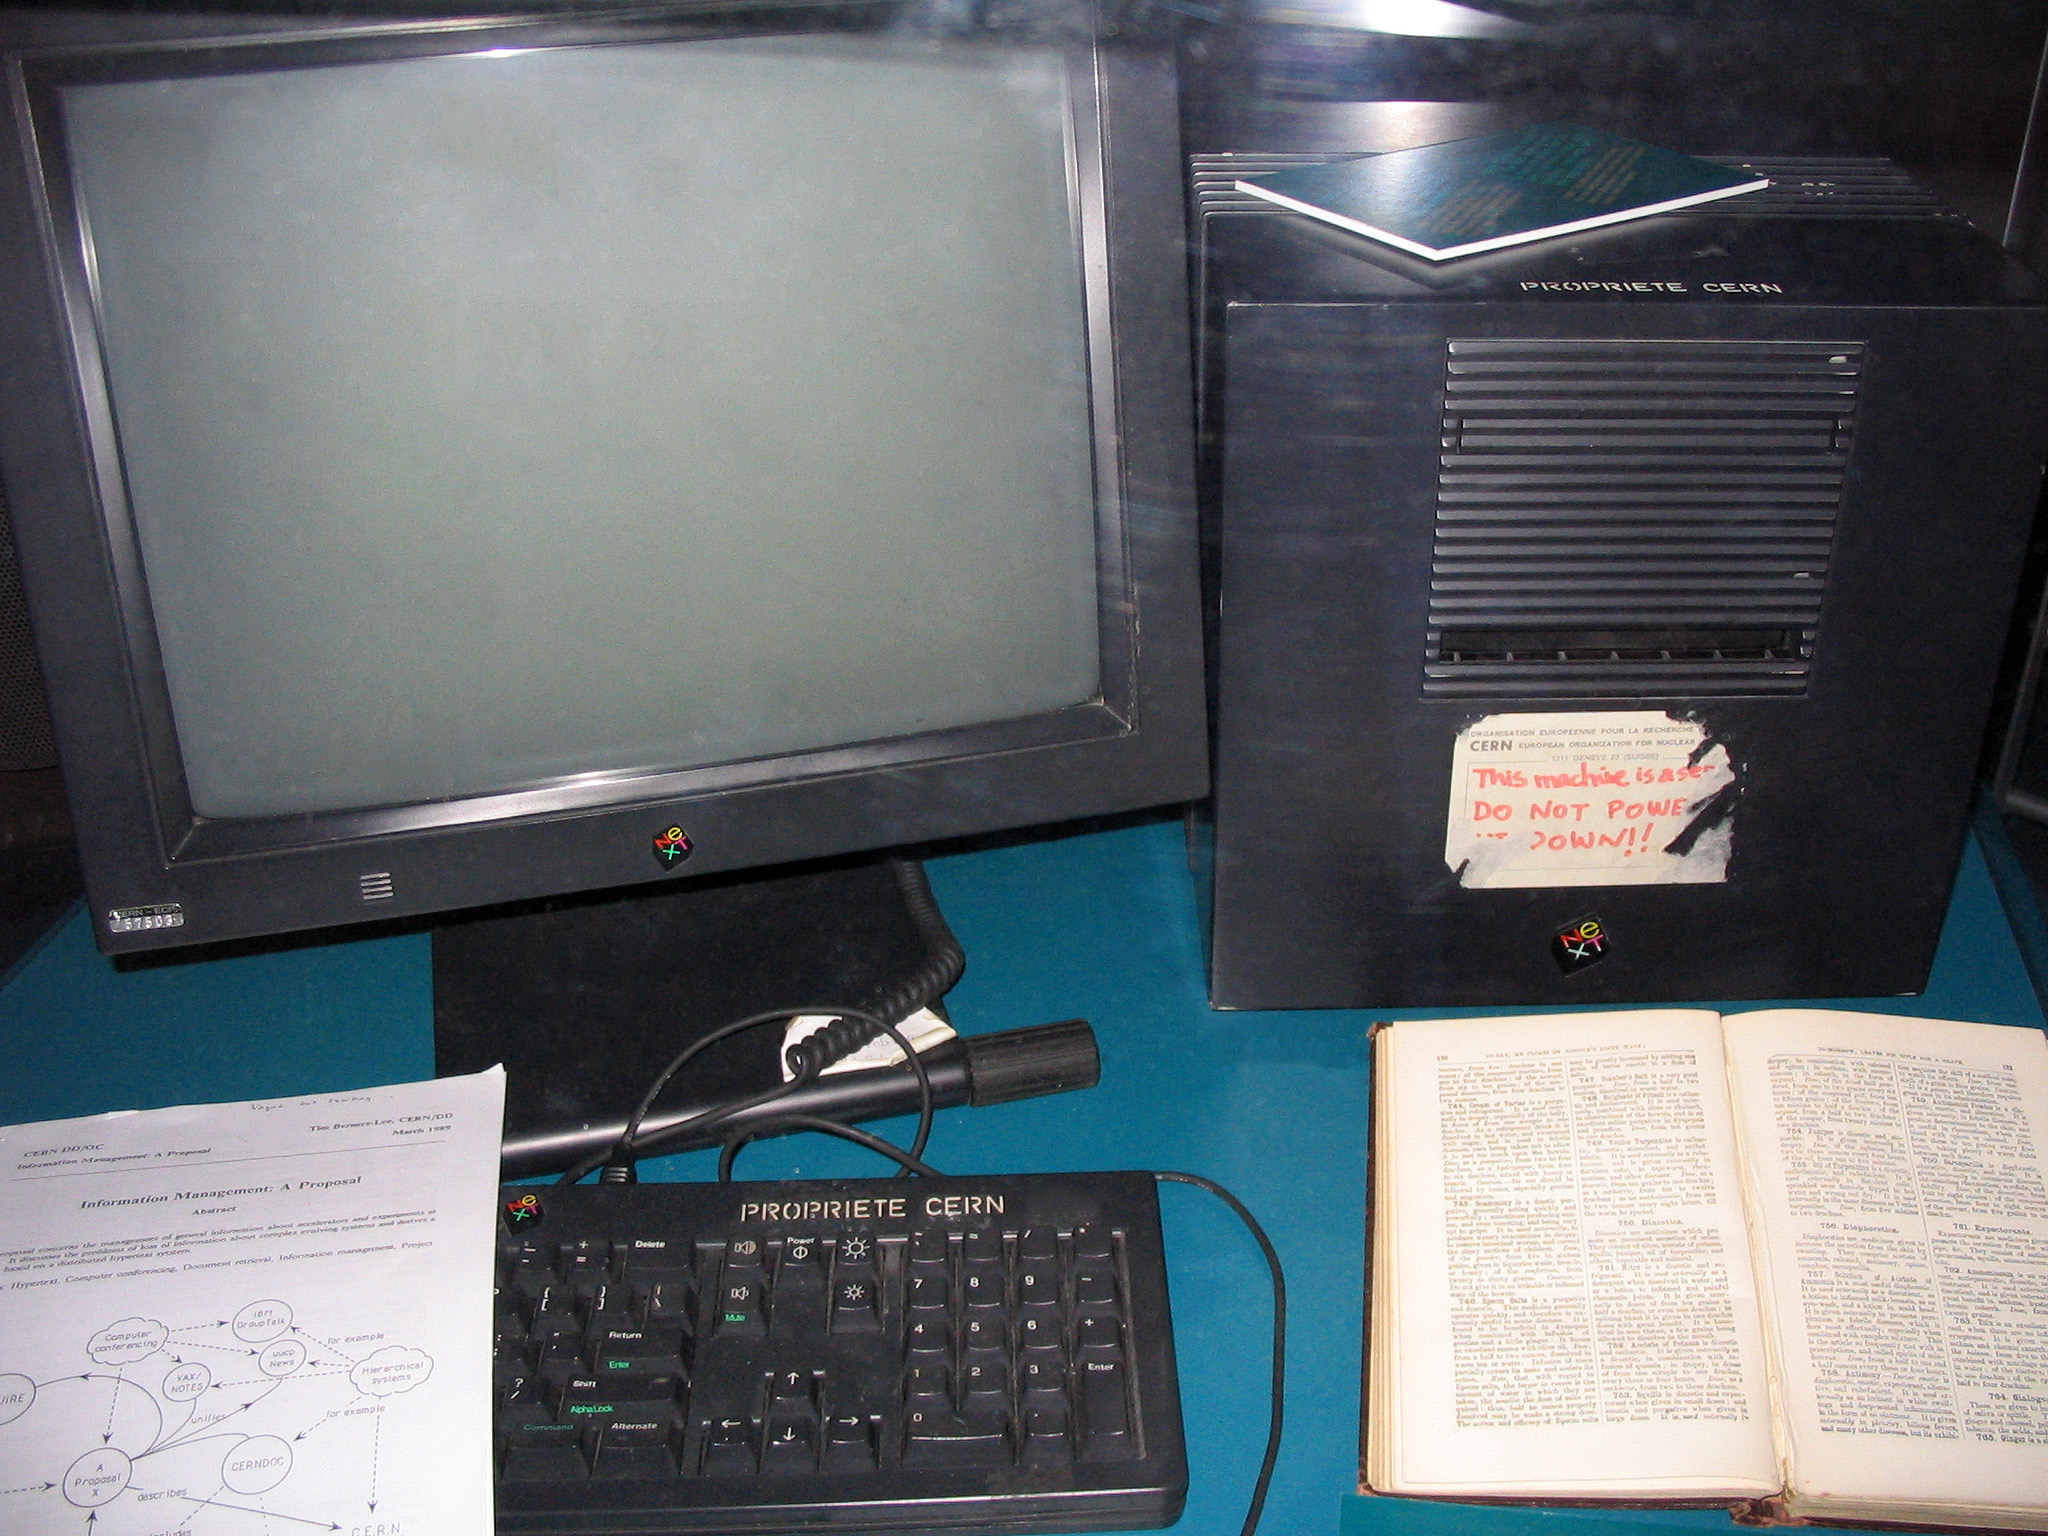 "This NeXT Computer was used by Berners-Lee at CERN and became the world's first web server" [1] Coolcaesar at the English-language Wikipedia, CC BY-SA 3.0 <http://creativecommons.org/licenses/by-sa/3.0/>, via Wikimedia Commons